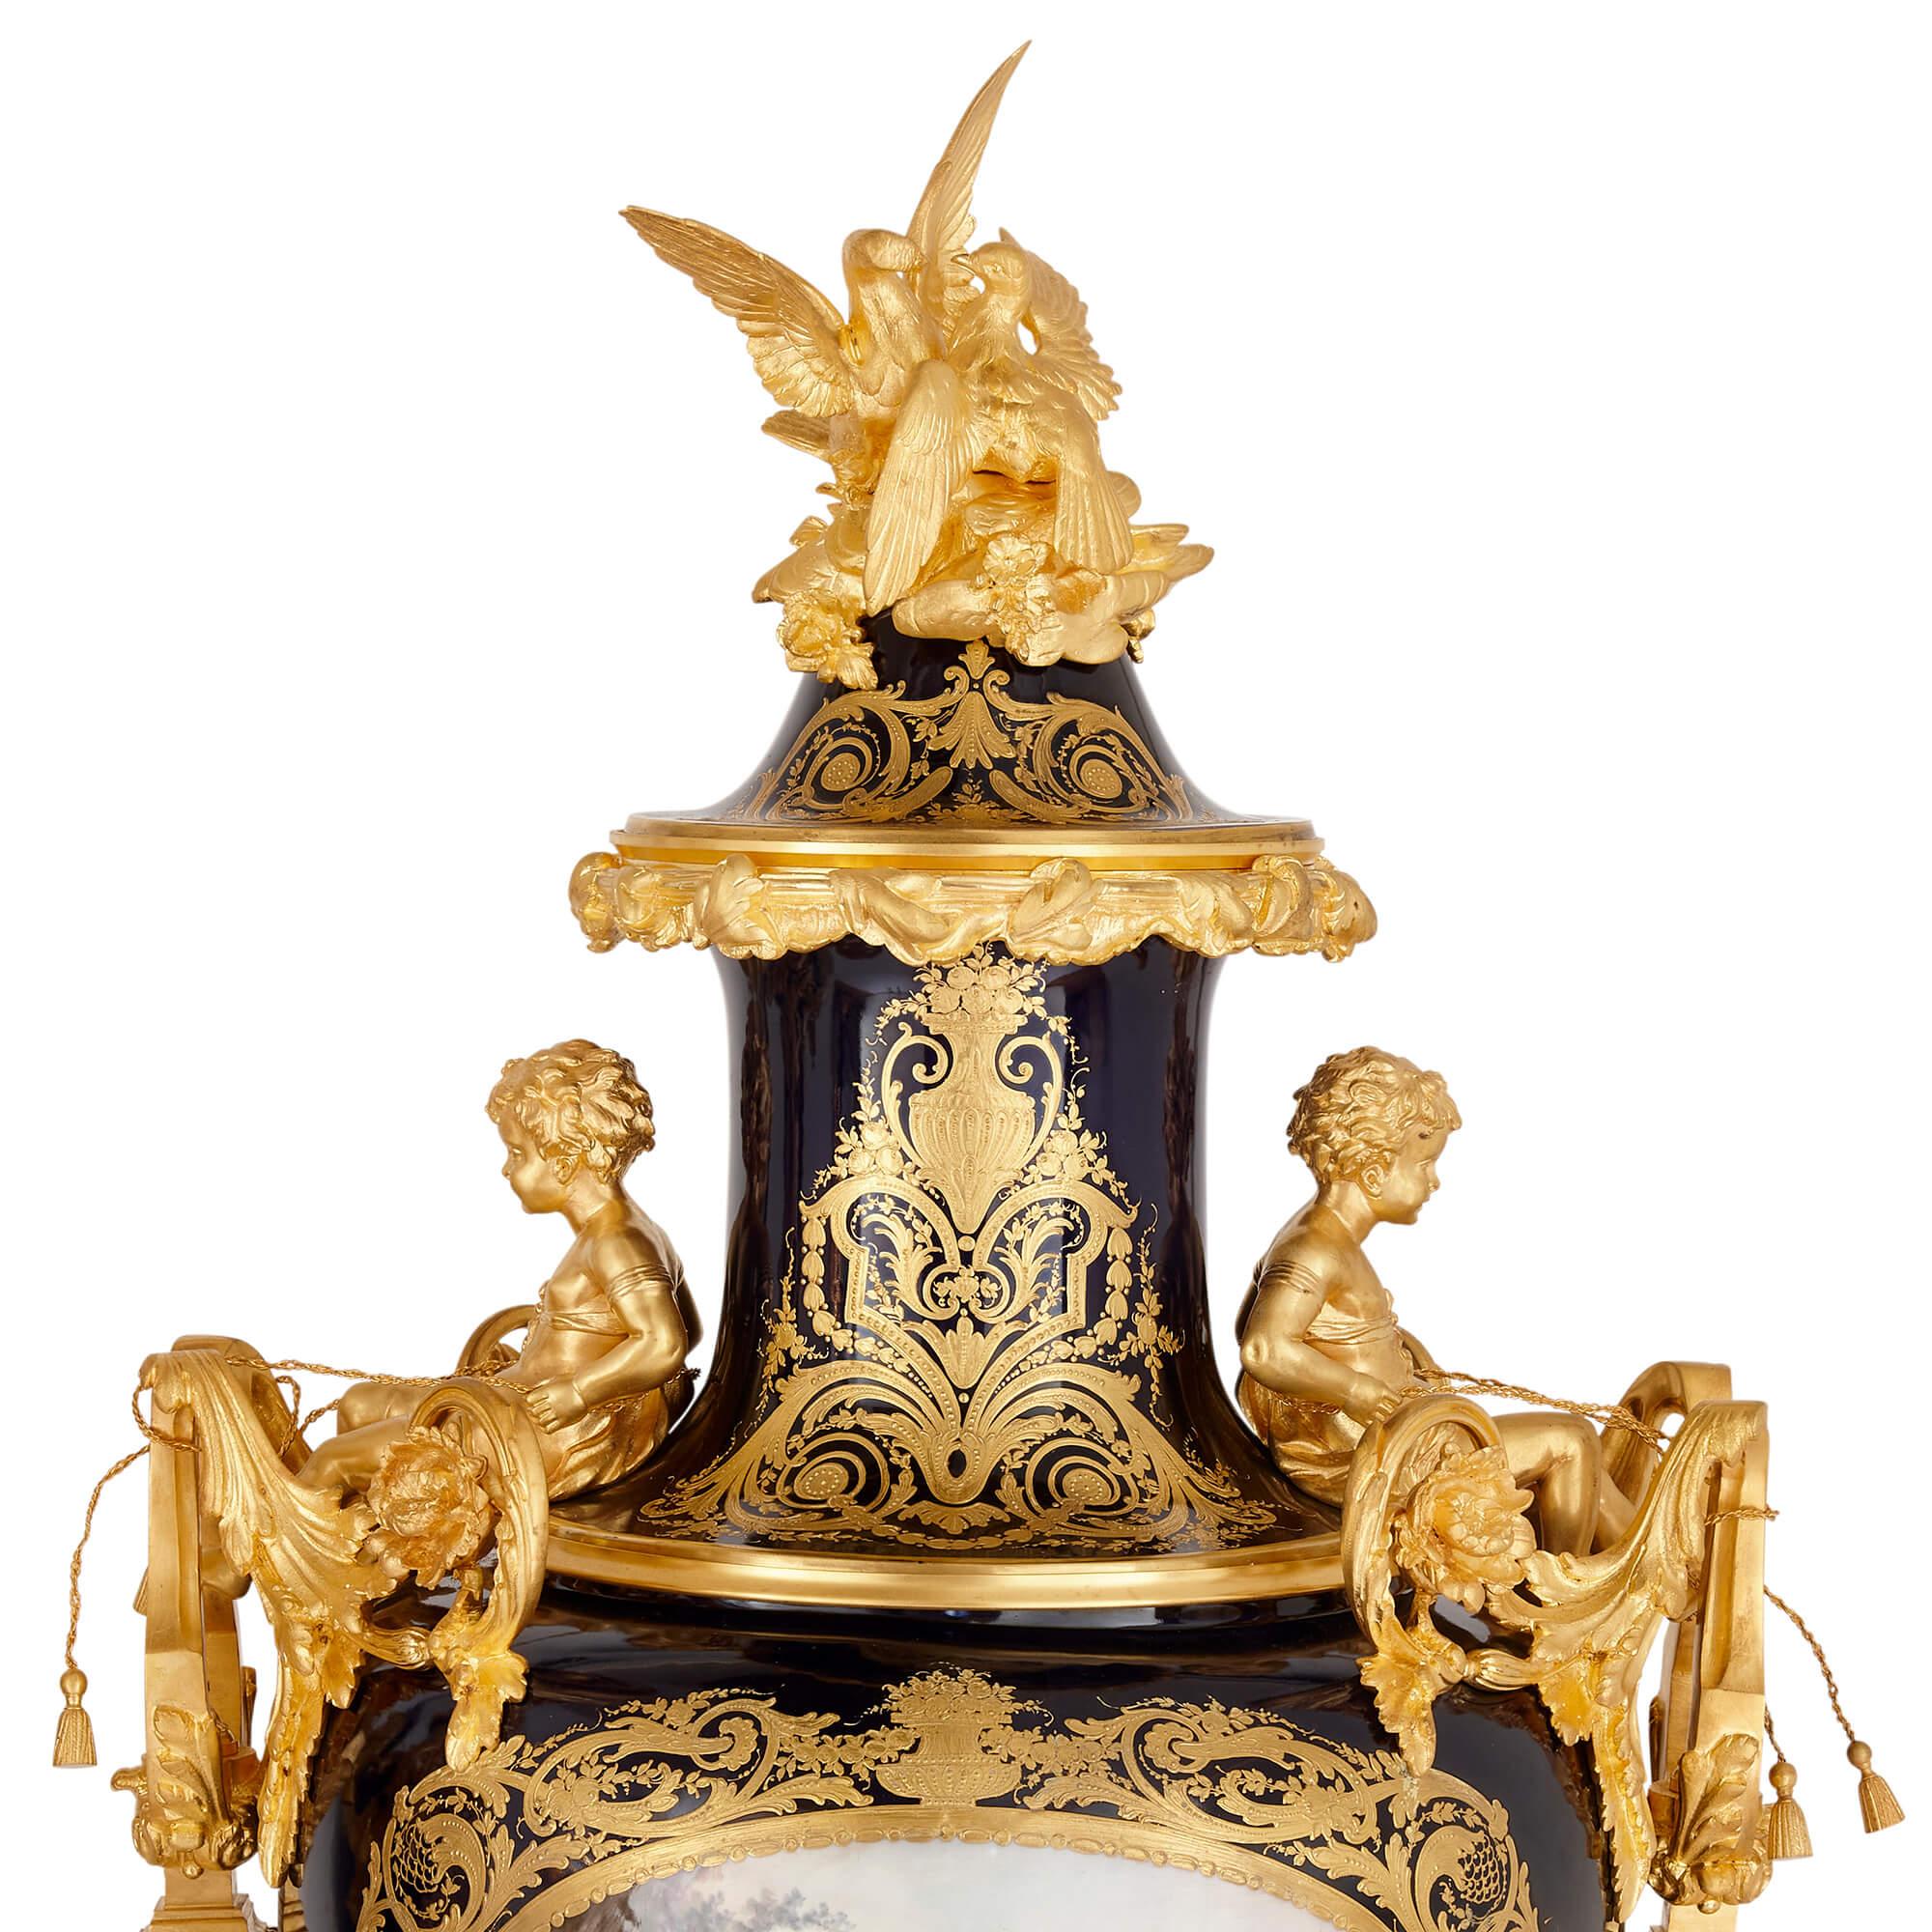 Pair of Large Gilt-Bronze Mounted Sèvres-style Porcelain Vases with Pedestals For Sale 3